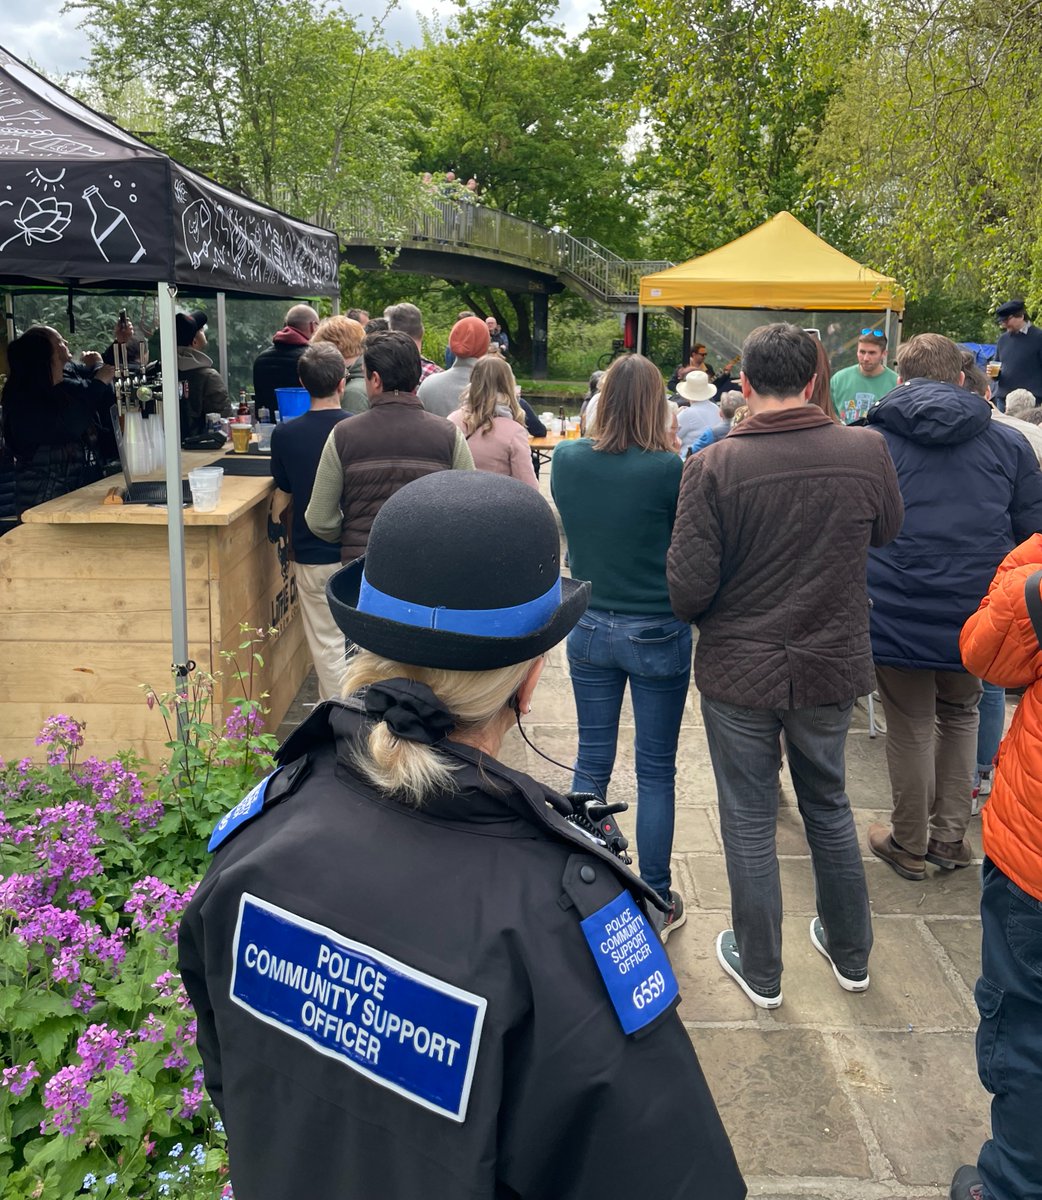 This afternoon, officers from the Jericho NHPT have been out and about in Jericho on foot patrols.👮 We popped into Jericho's Lazy Saturday event on Canal Street. It allowed officers to identify any local issues and gain intelligence! The live music was an added bonus too!🧑‍🎤